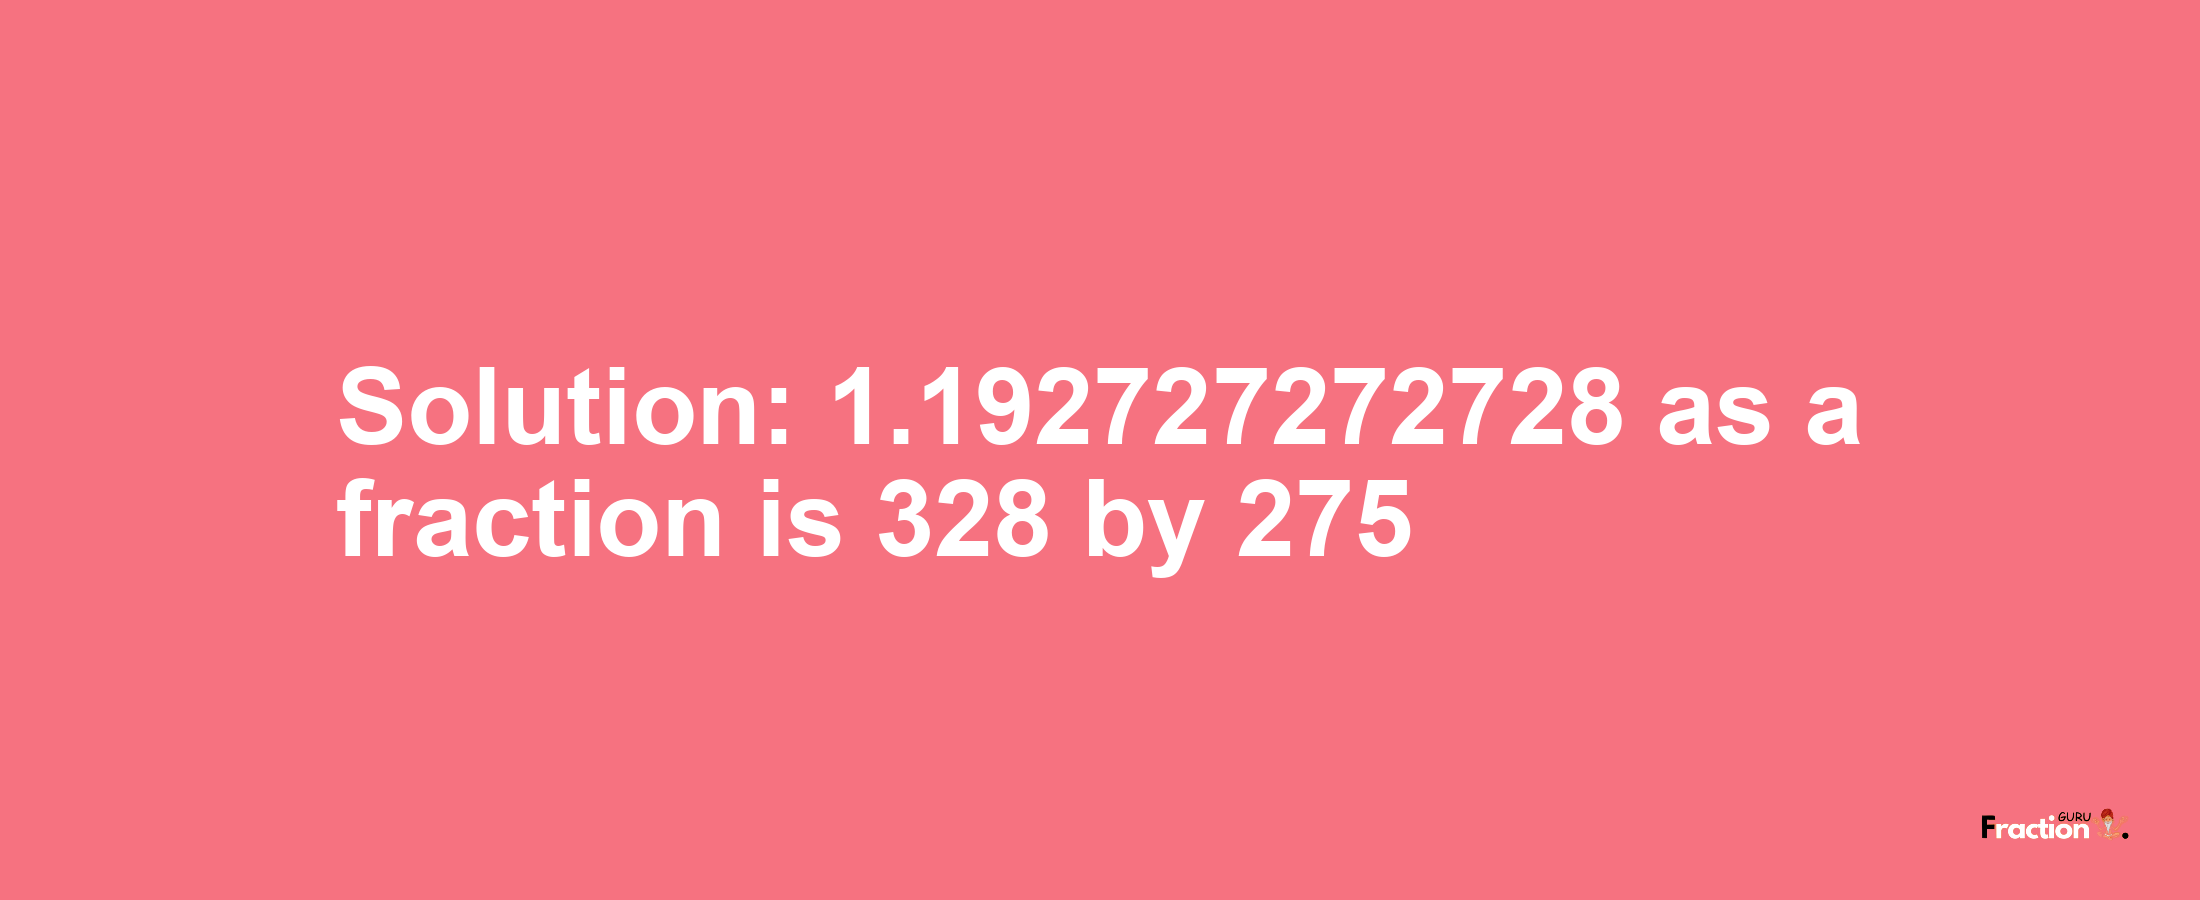 Solution:1.192727272728 as a fraction is 328/275